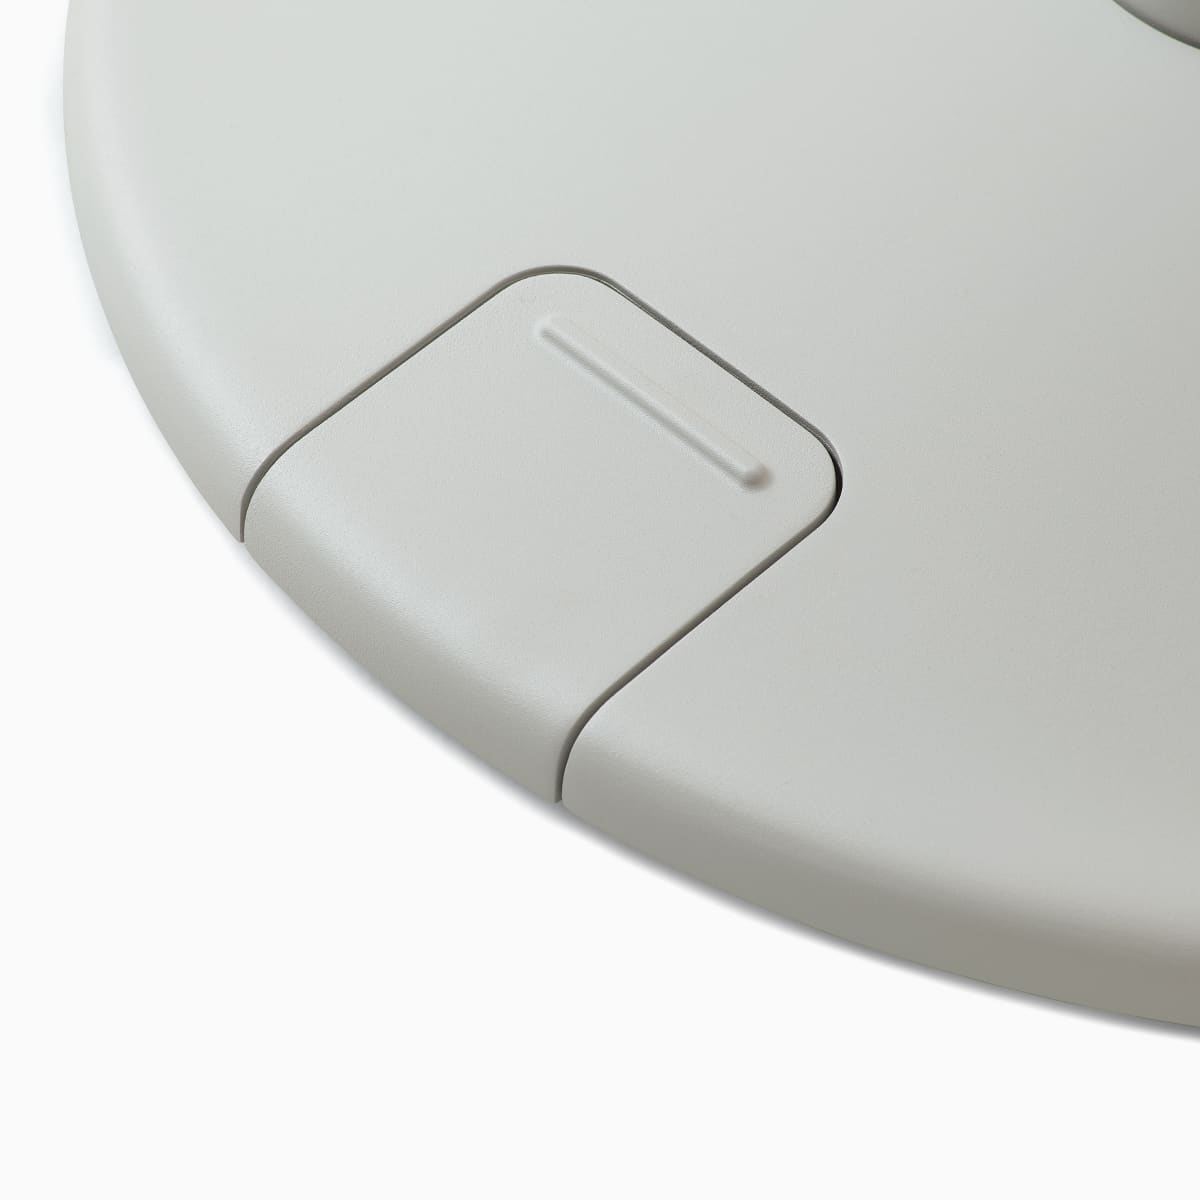 Detail of a grey OE1 Sit-to-Stand Table base with foot-controlled up/down pedal, viewed from an angle.